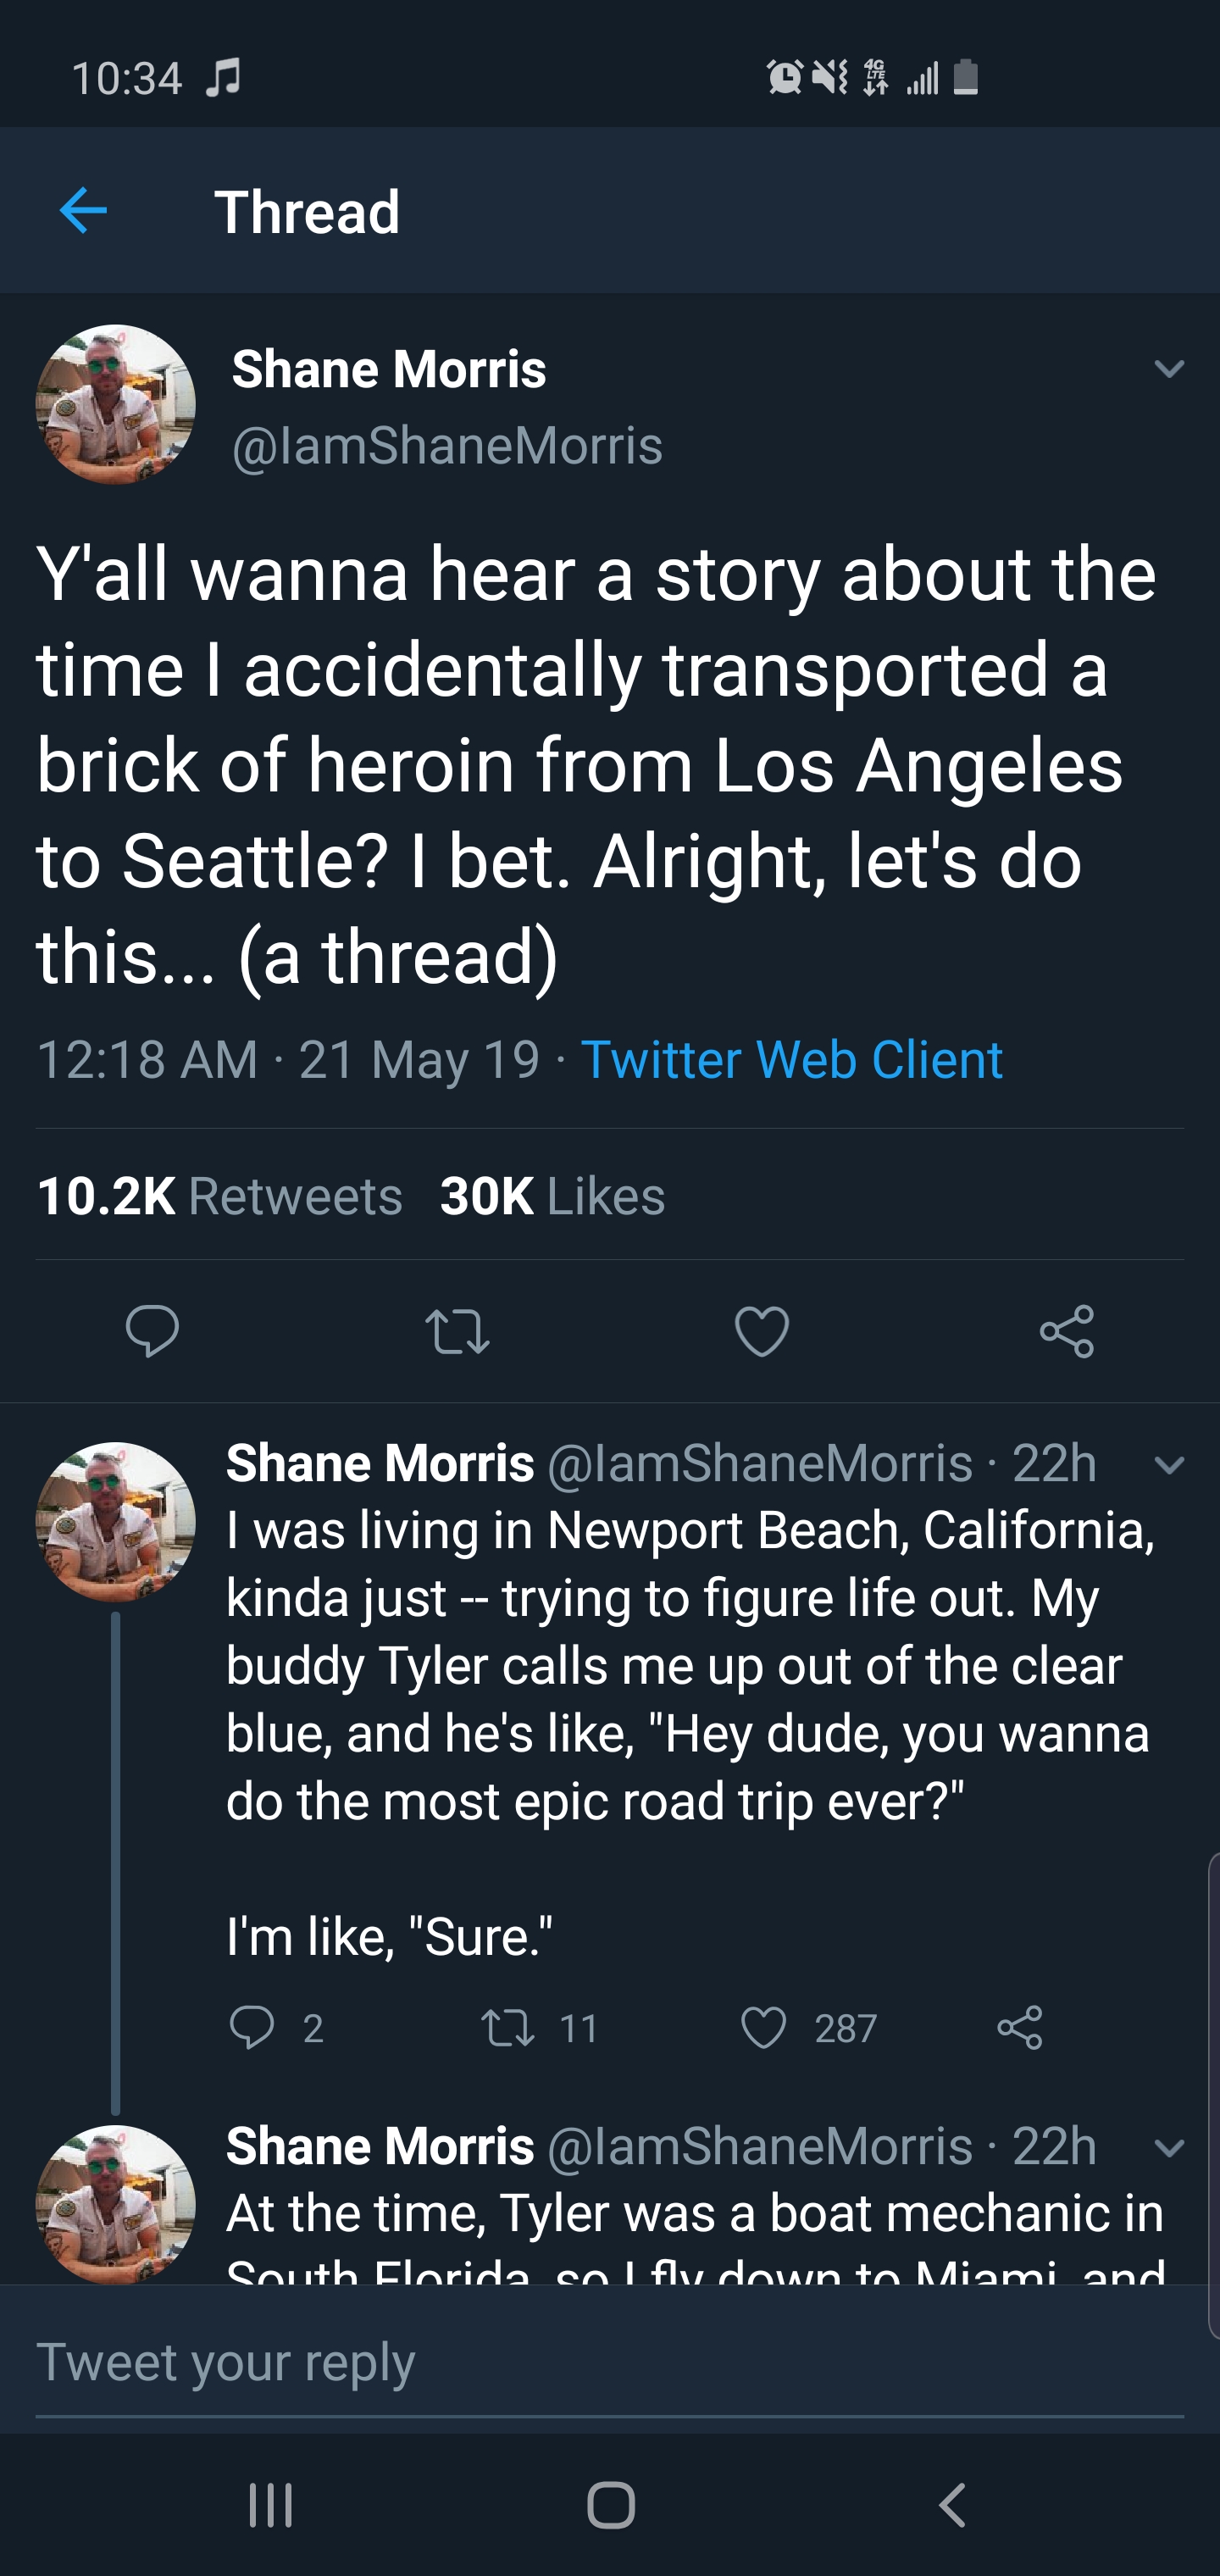 thread story - 2 Aaa Thread Shane Morris Morris Y'all wanna hear a story about the time I accidentally transported a brick of heroin from Los Angeles to Seattle? I bet. Alright, let's do this... a thread 21 May 19 Twitter Web Client 30K 22 Shane Morris Sh